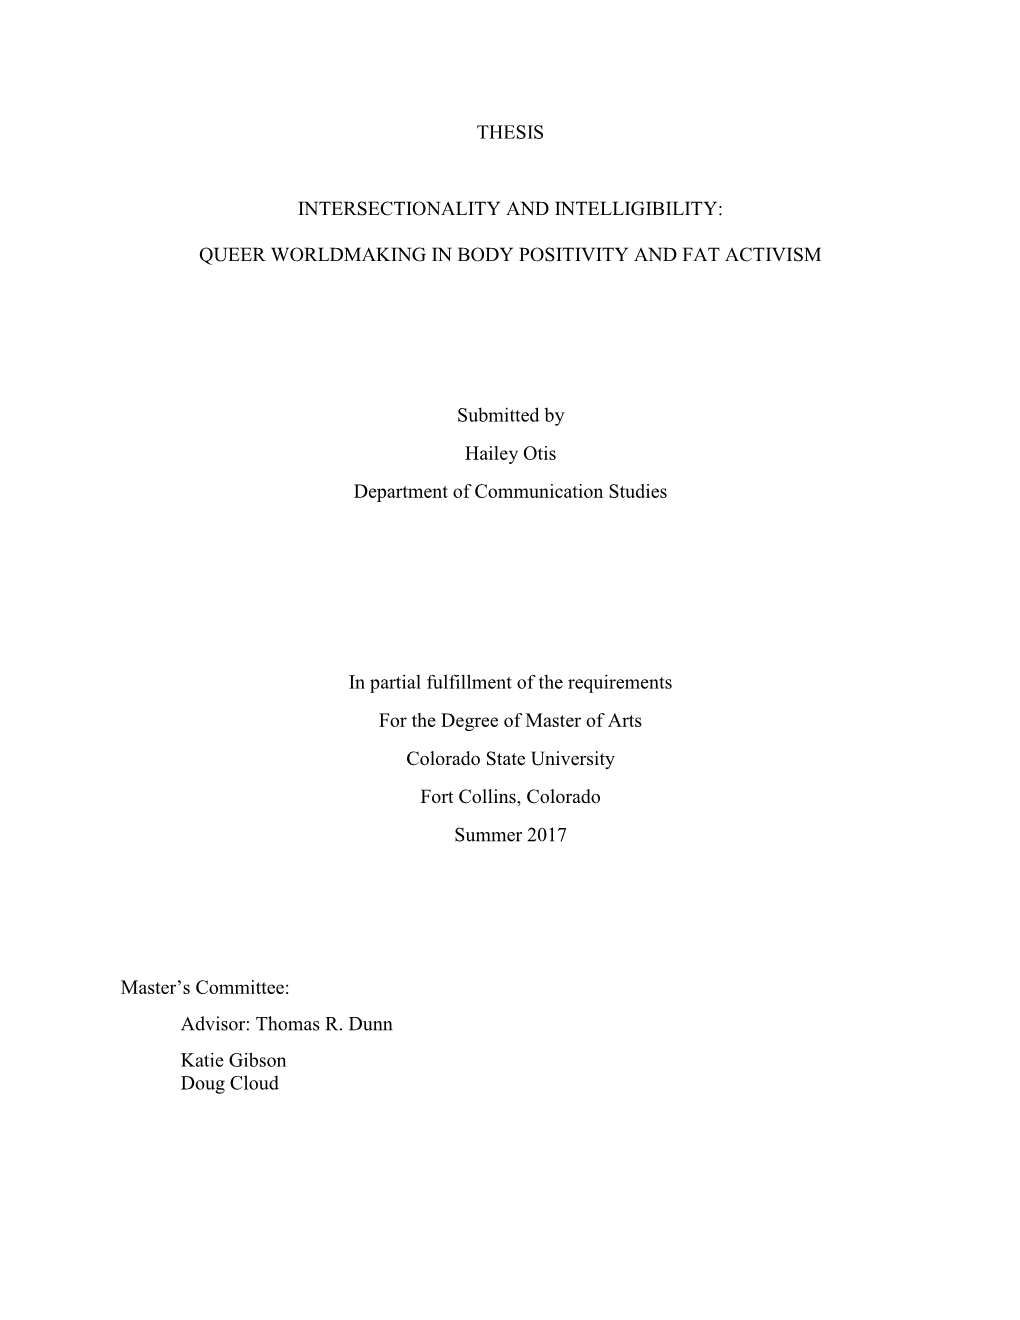 Thesis Intersectionality and Intelligibility: Queer